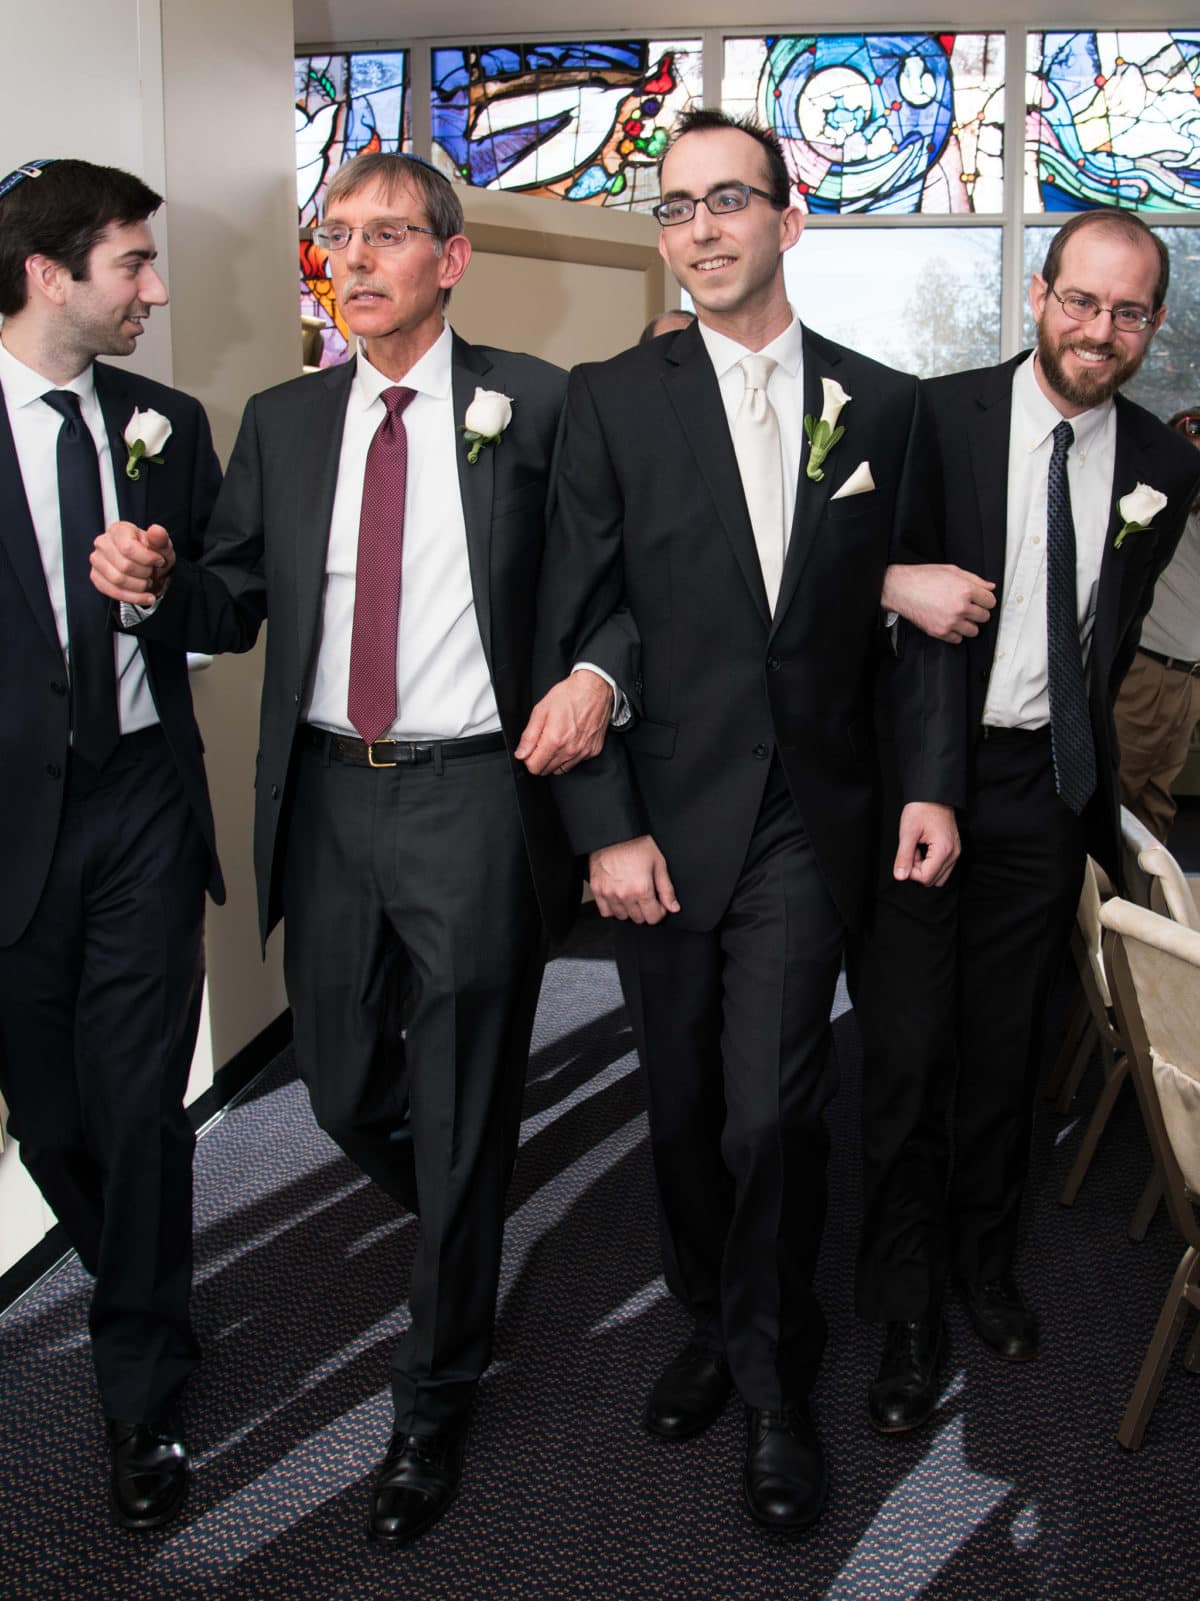 Wedding-Beth-El-New-Rochelle-New-York-Consevative-Groom-Father-Brothers